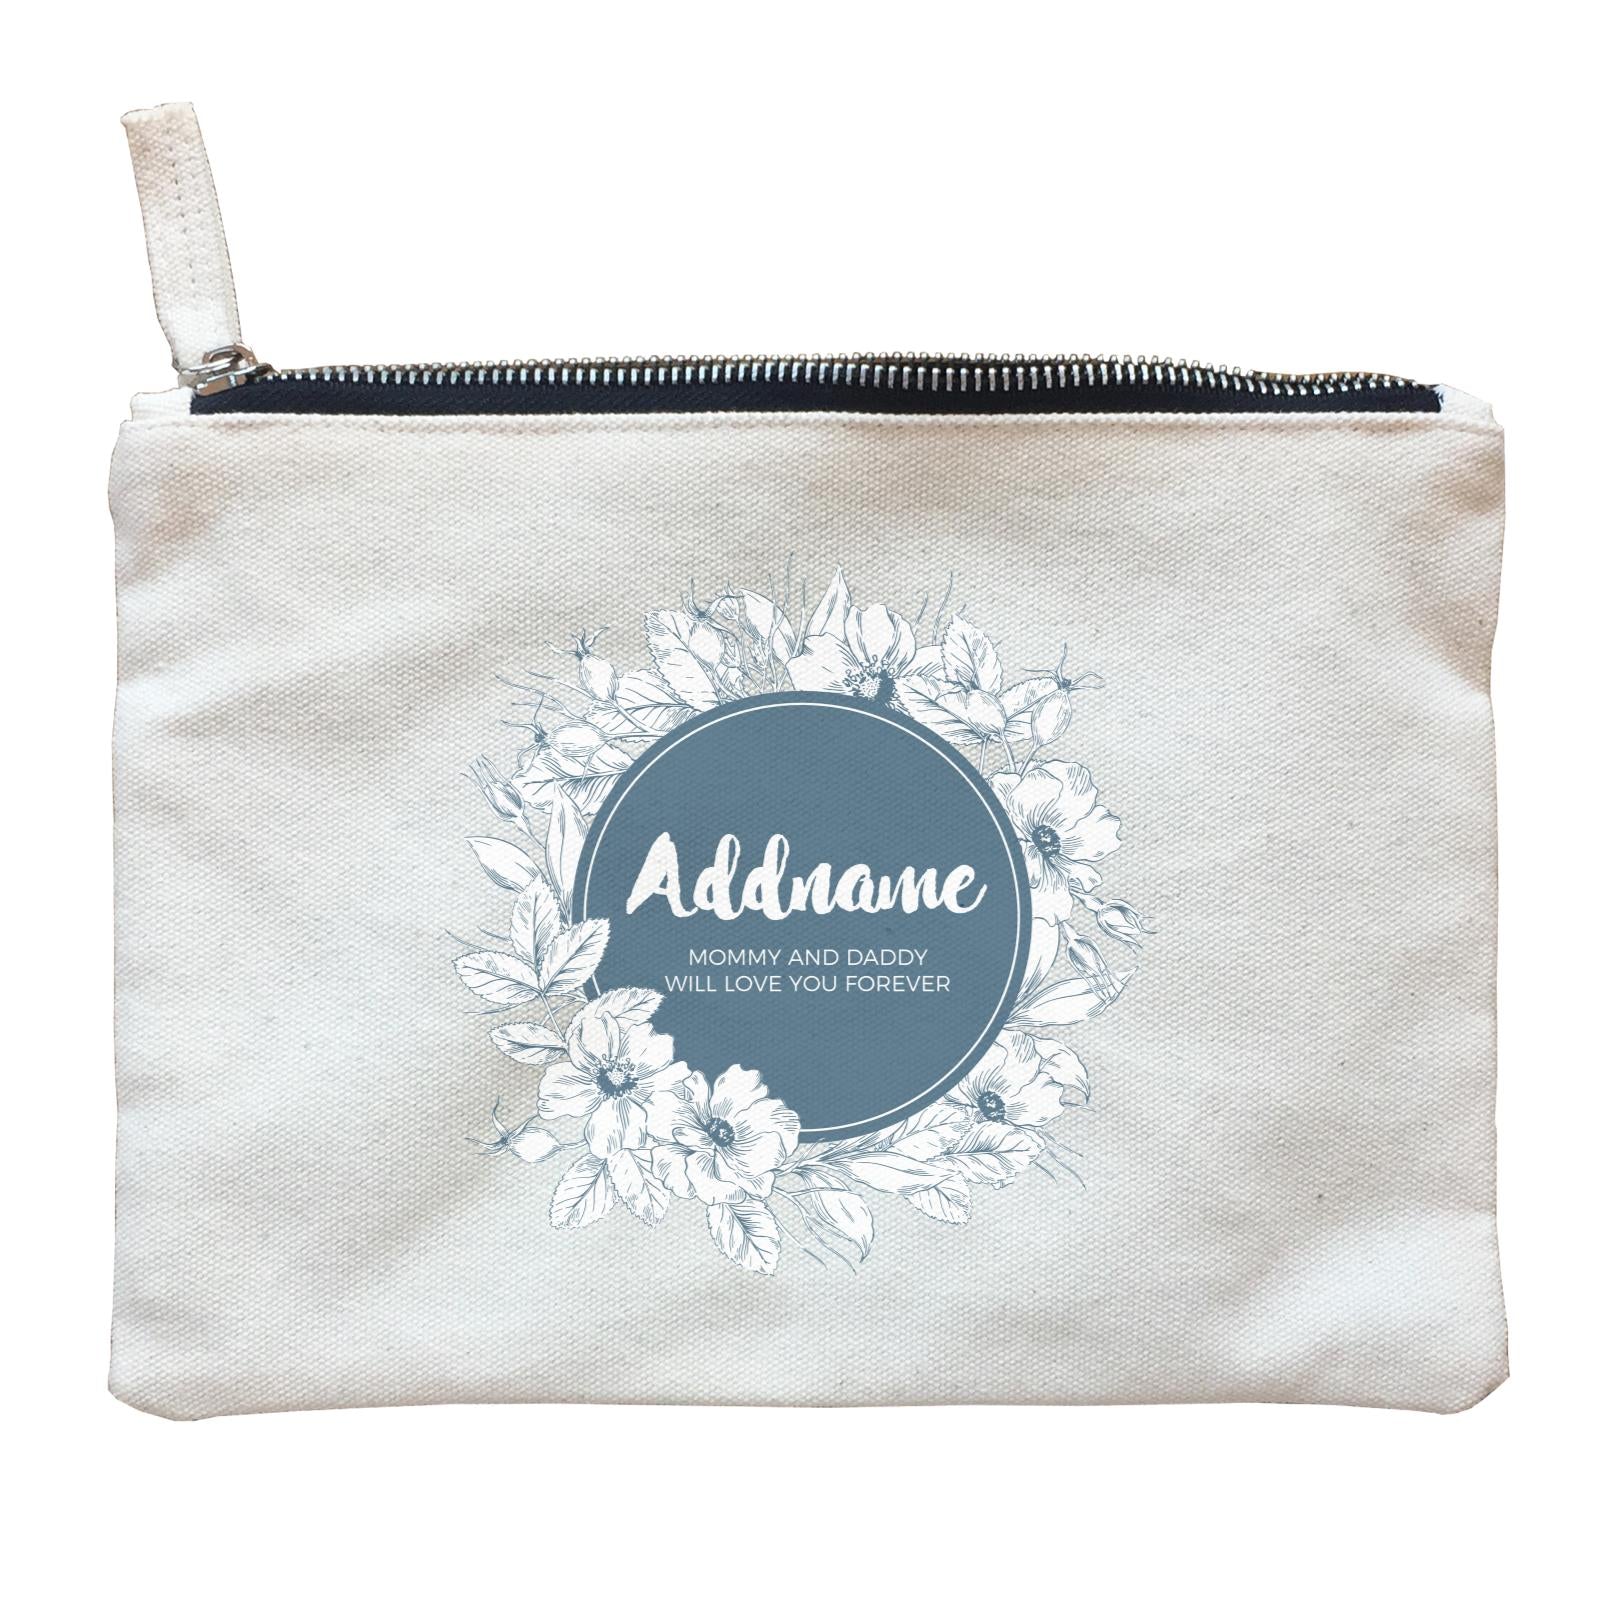 Navy Blue Flower Wreath Personalizable with Name and Text Zipper Pouch